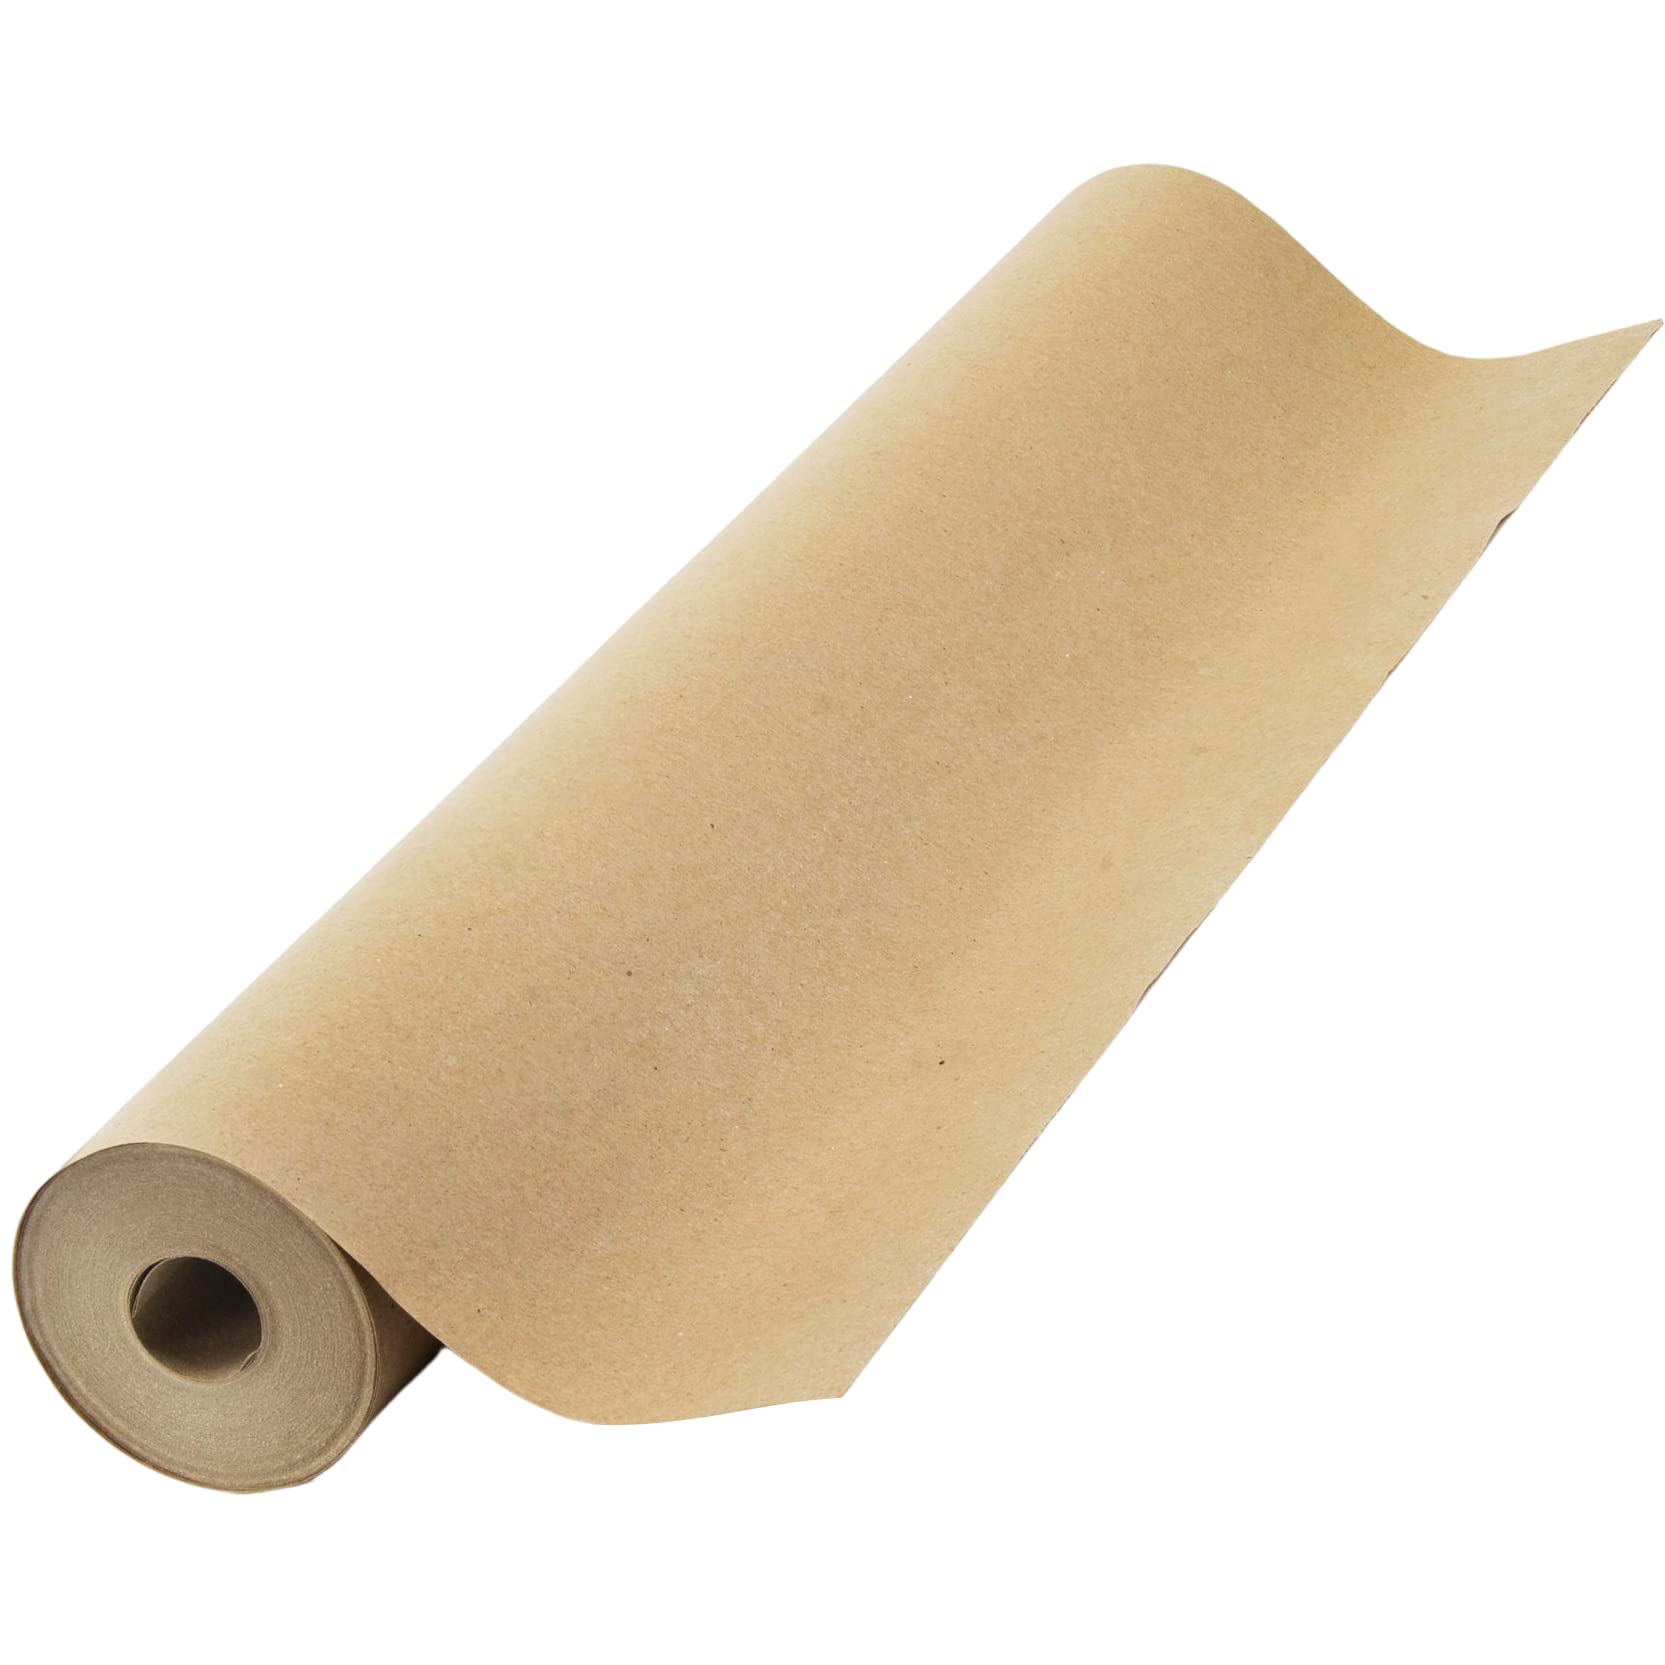 Brown Kraft Paper Roll - 36 Inch x 100 Feet - Recycled Paper Perfect for  Gift Wrapping, Craft, Packing, Floor Covering, Dunnage, Parcel, Table Runner